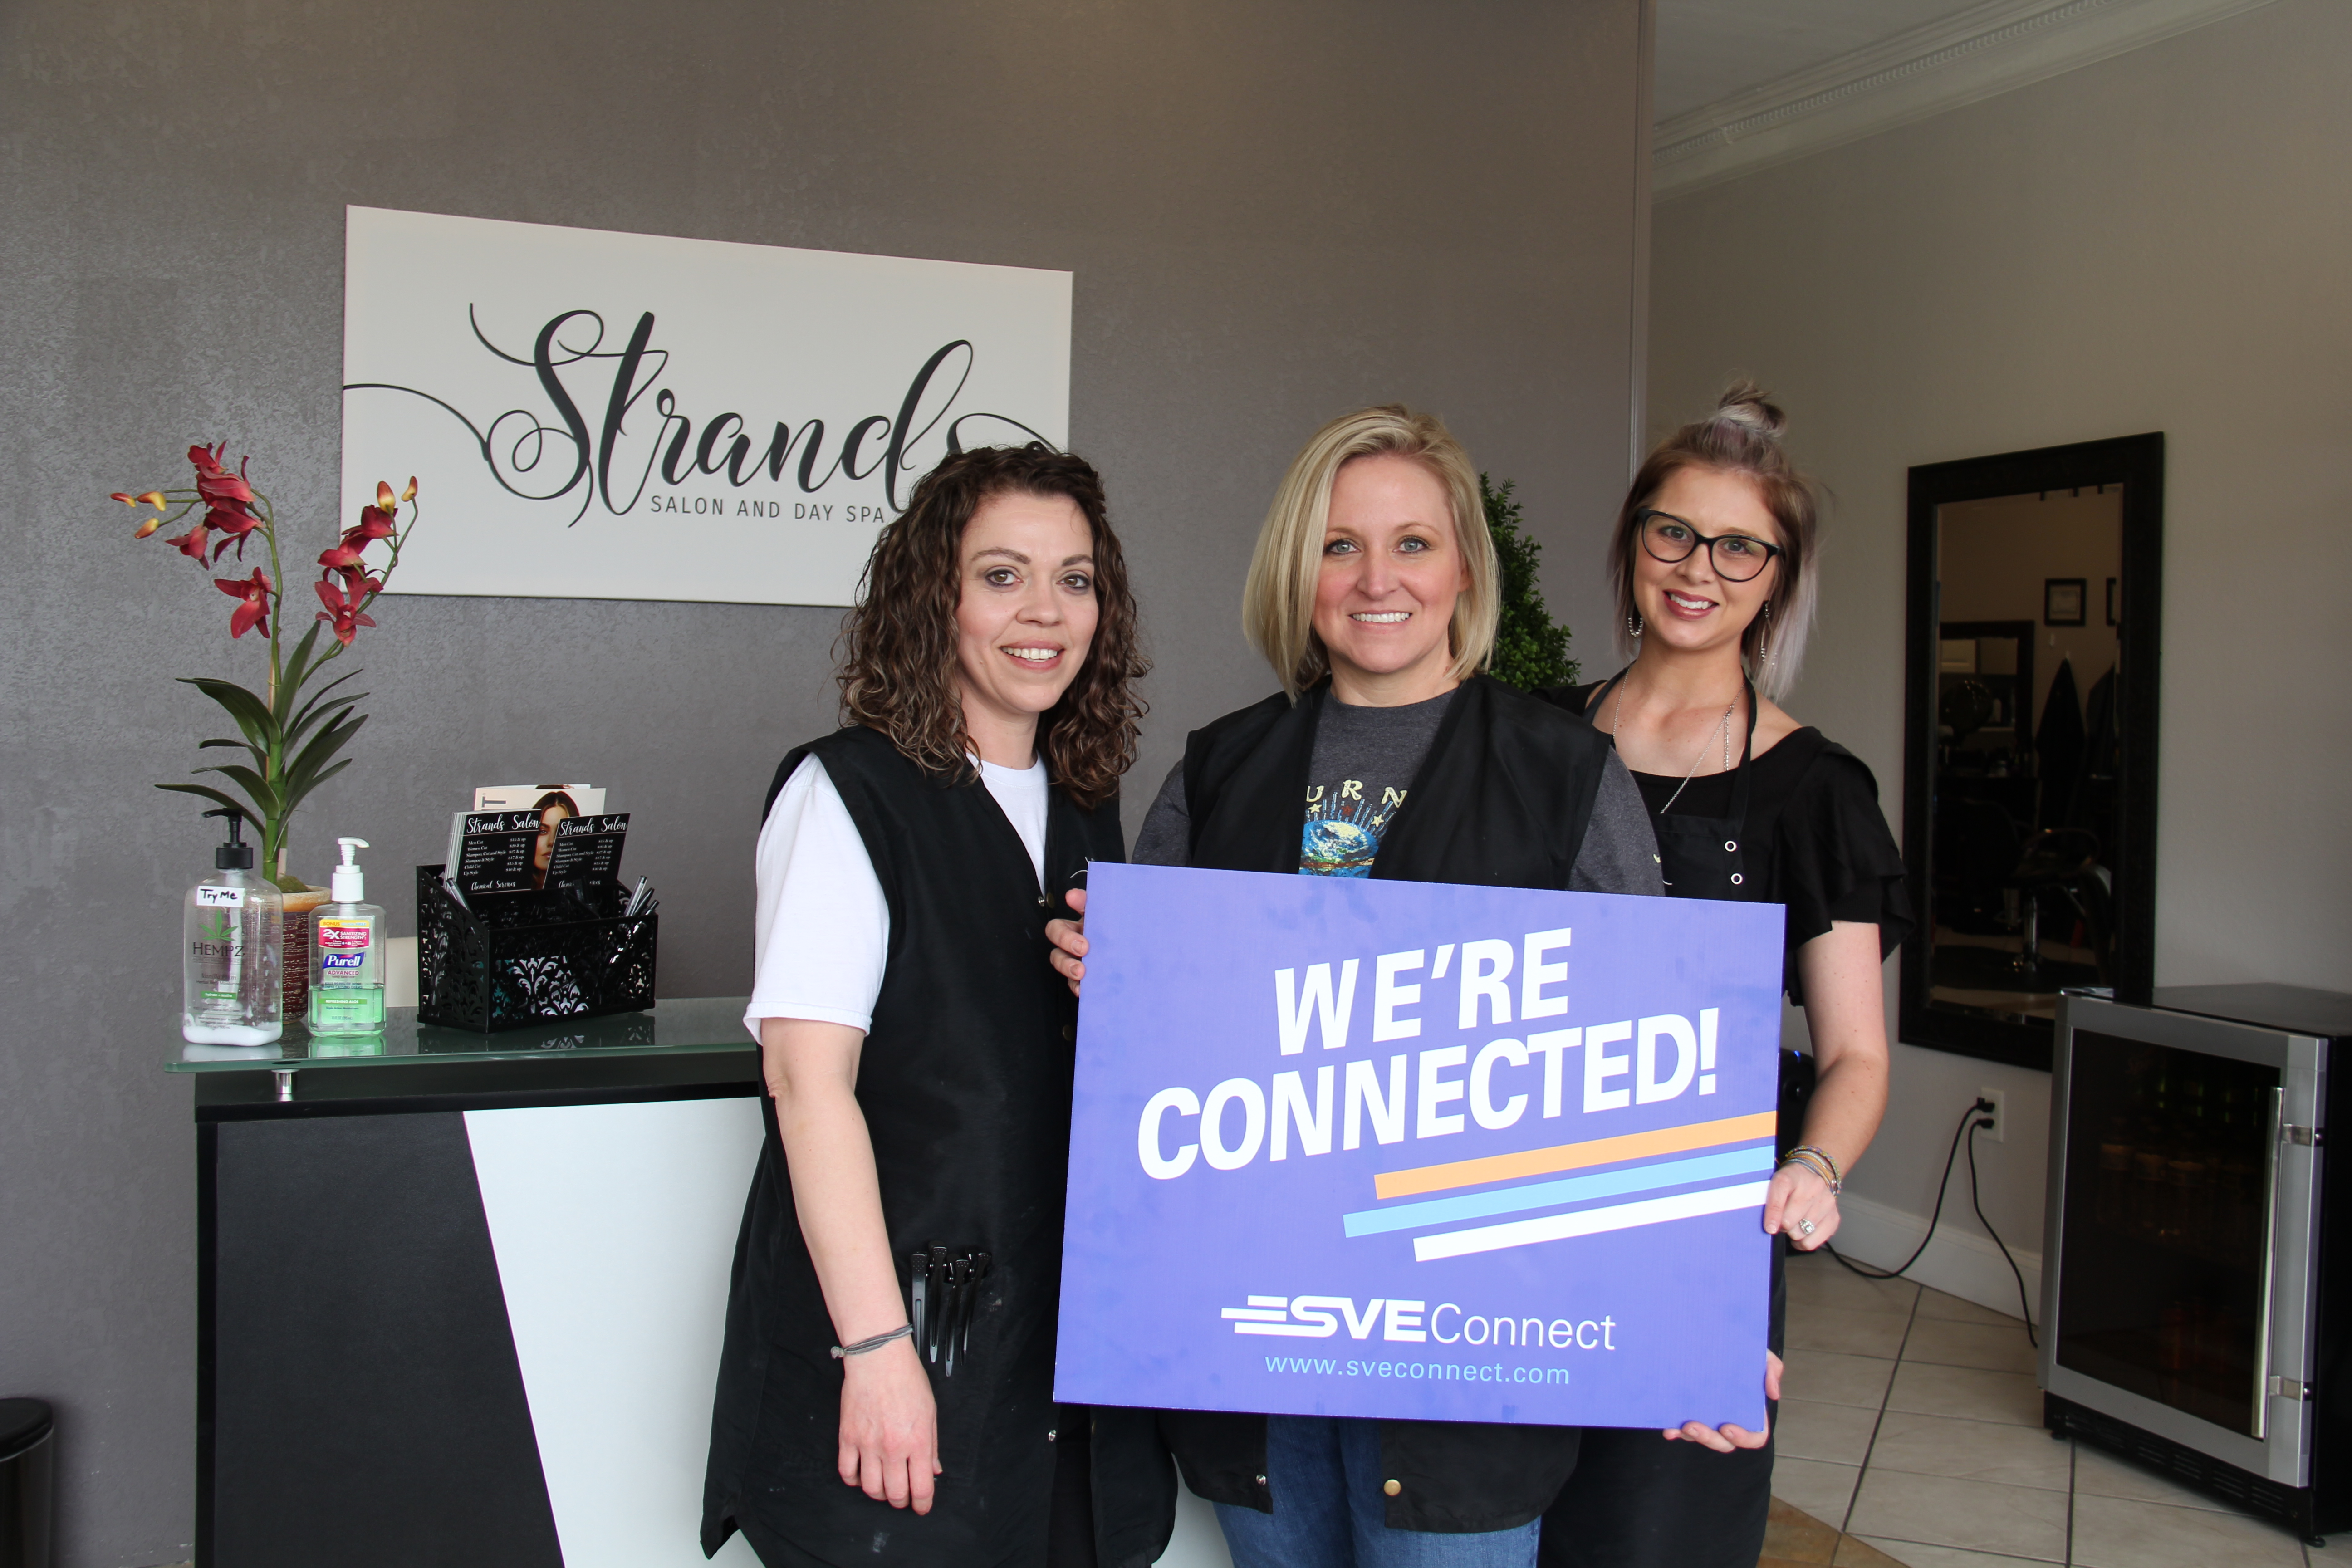 Strands Salon in Jasper is Connected